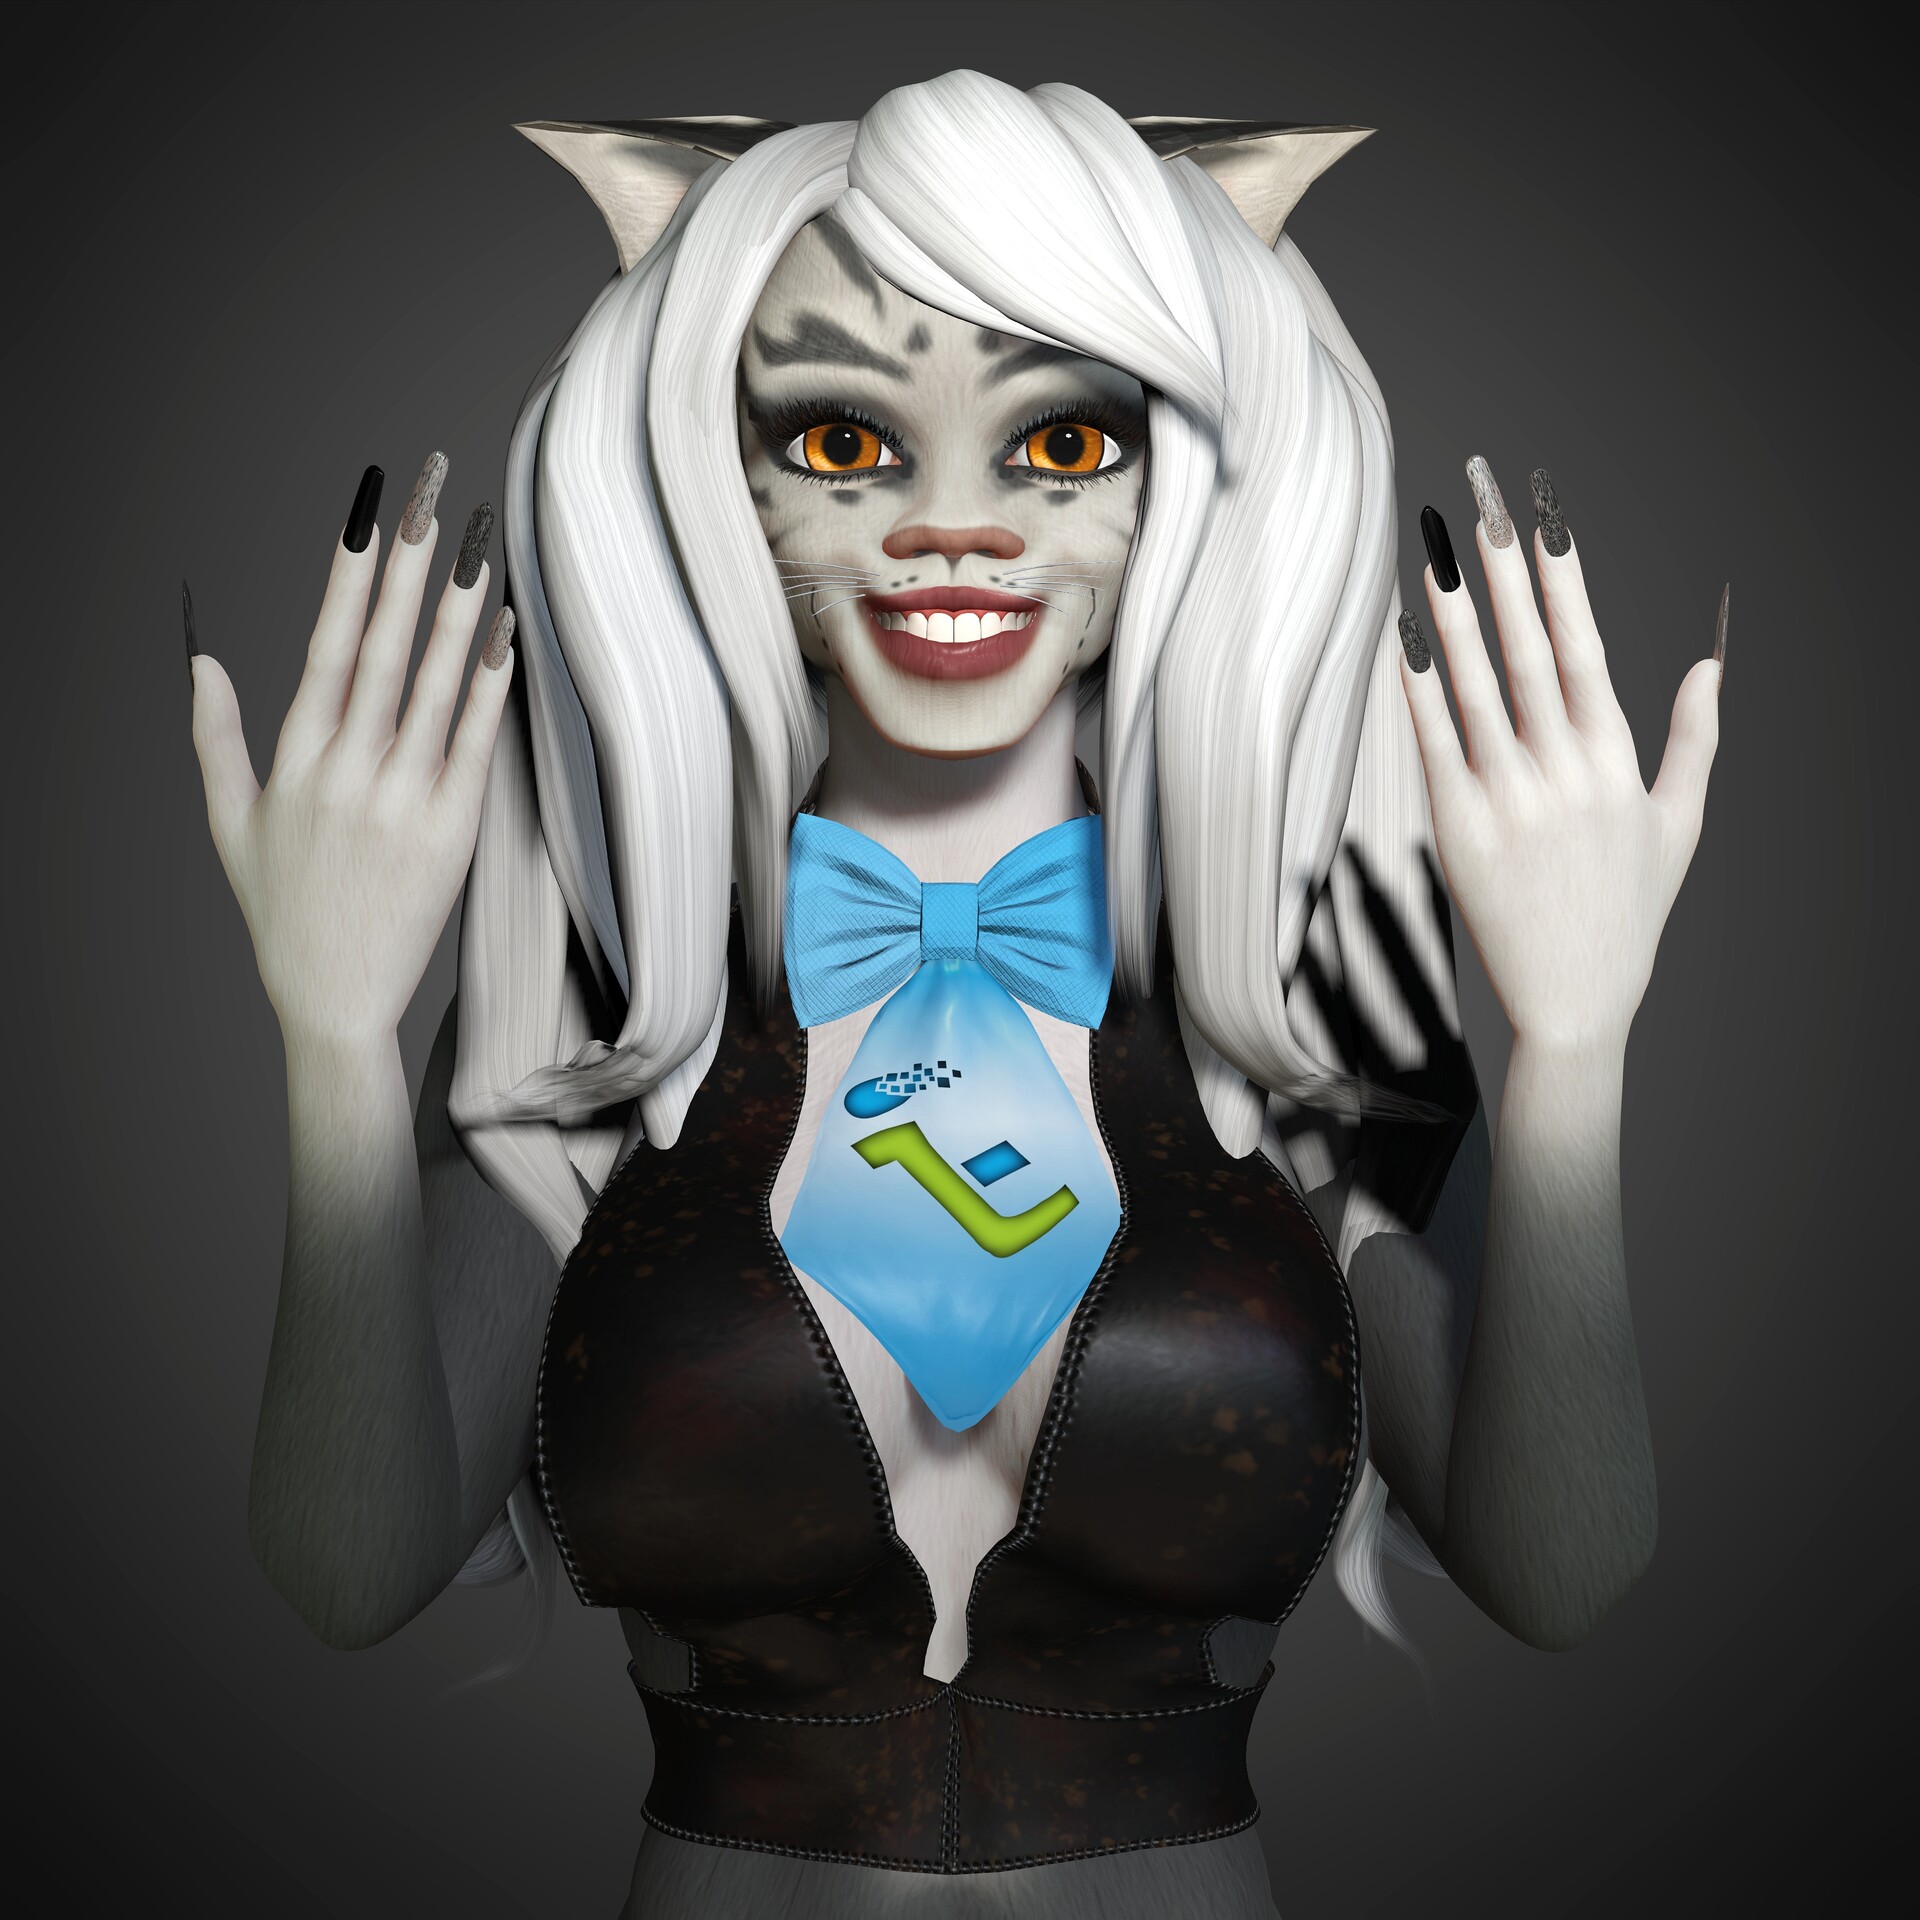 ArtStation - 3D Cartoon sexy woman cat for TechLevitate for video game